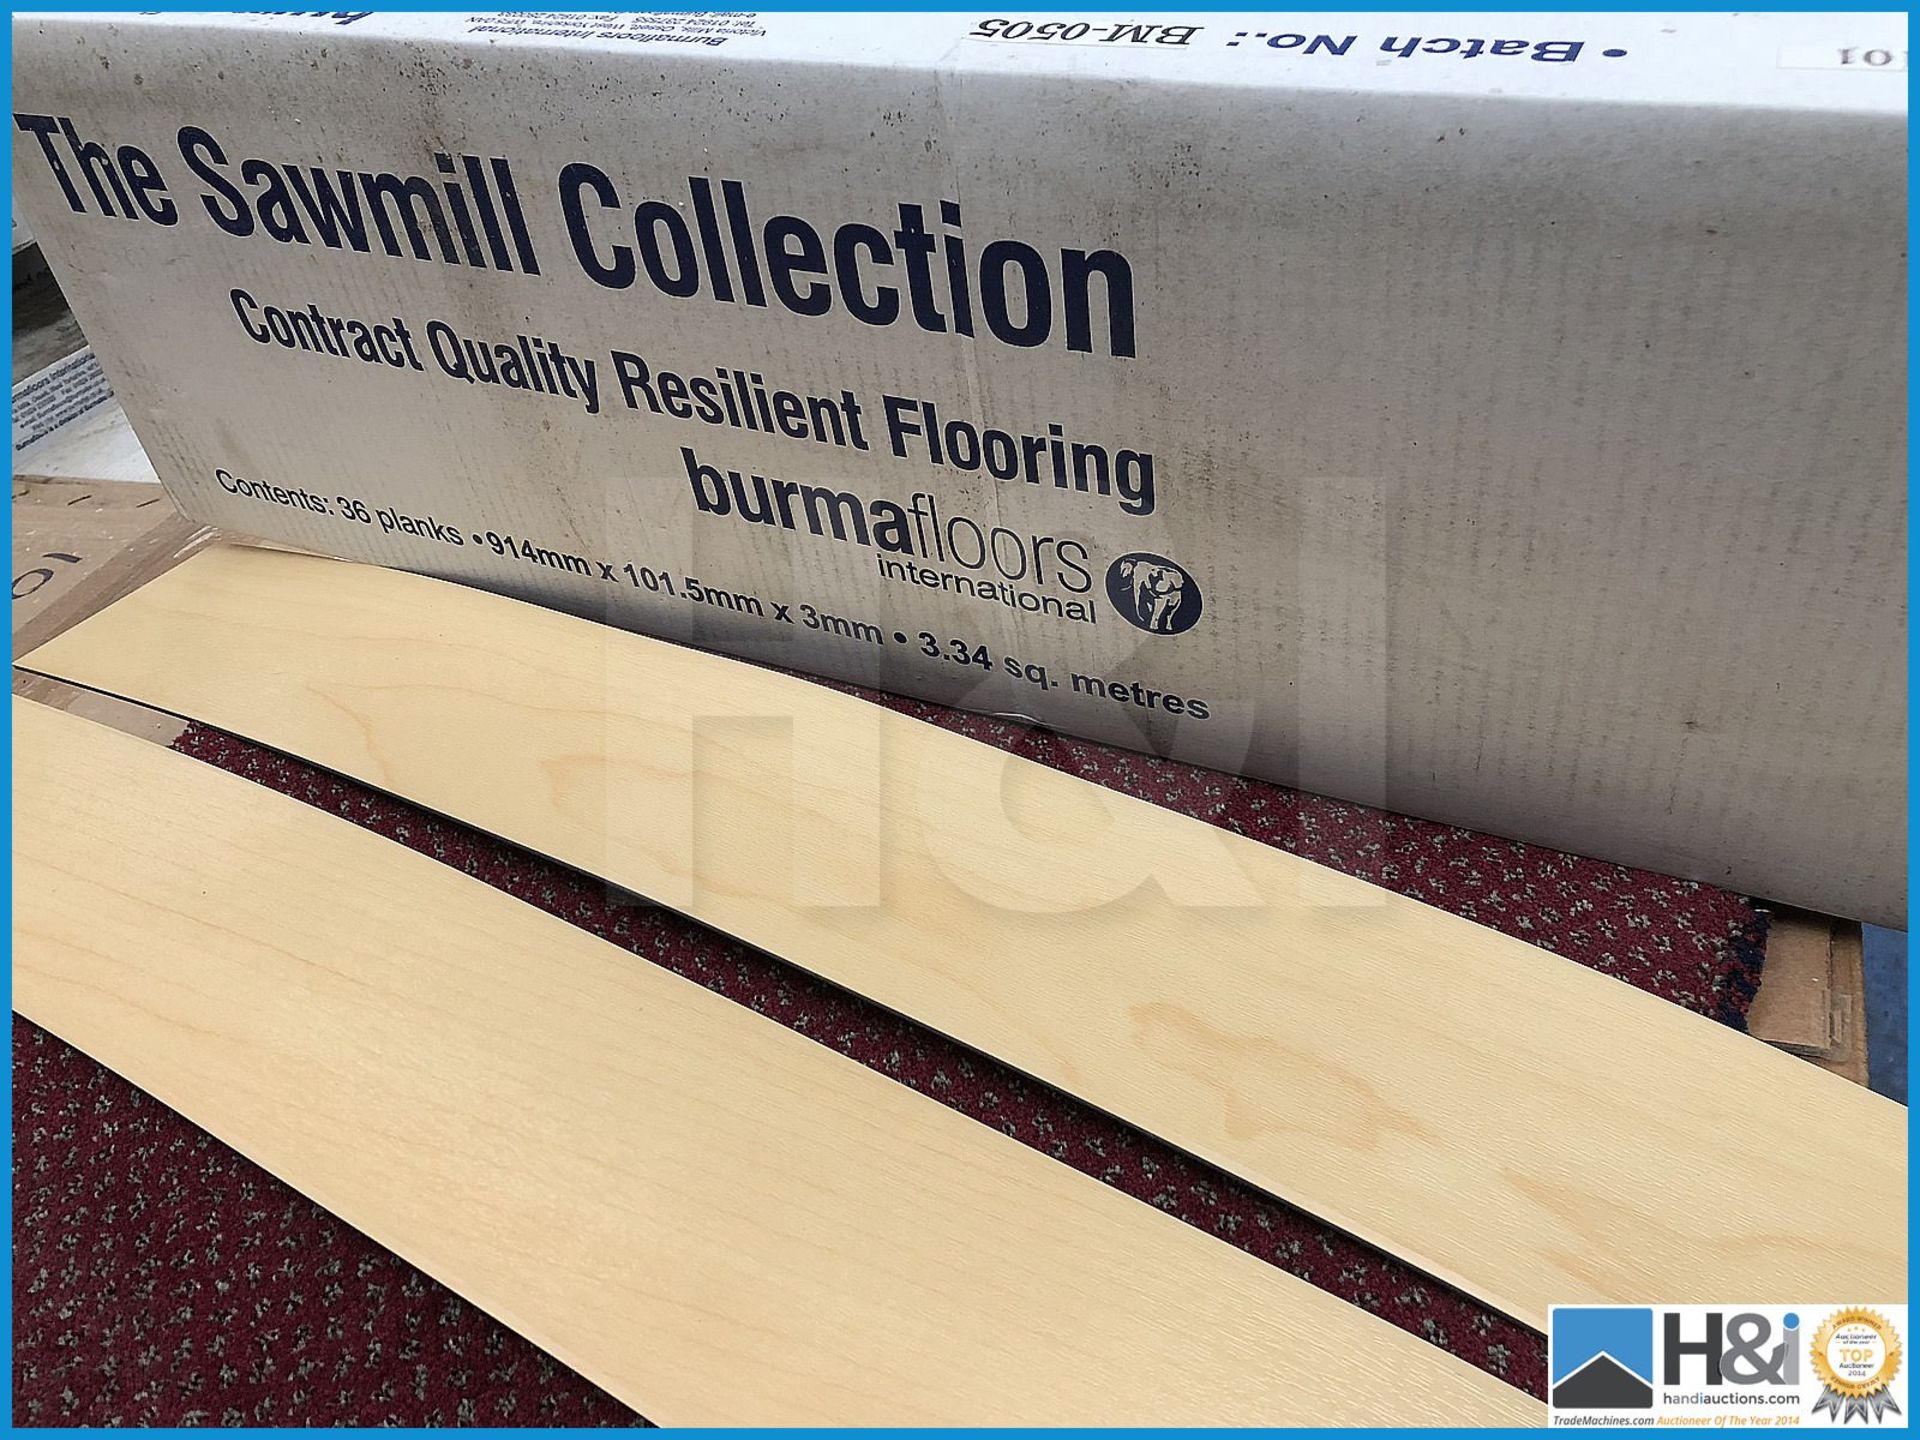 10 boxes of brand new Burmafloors Sawmill Collection maple floor vinyl planks. Extremely heavy grade